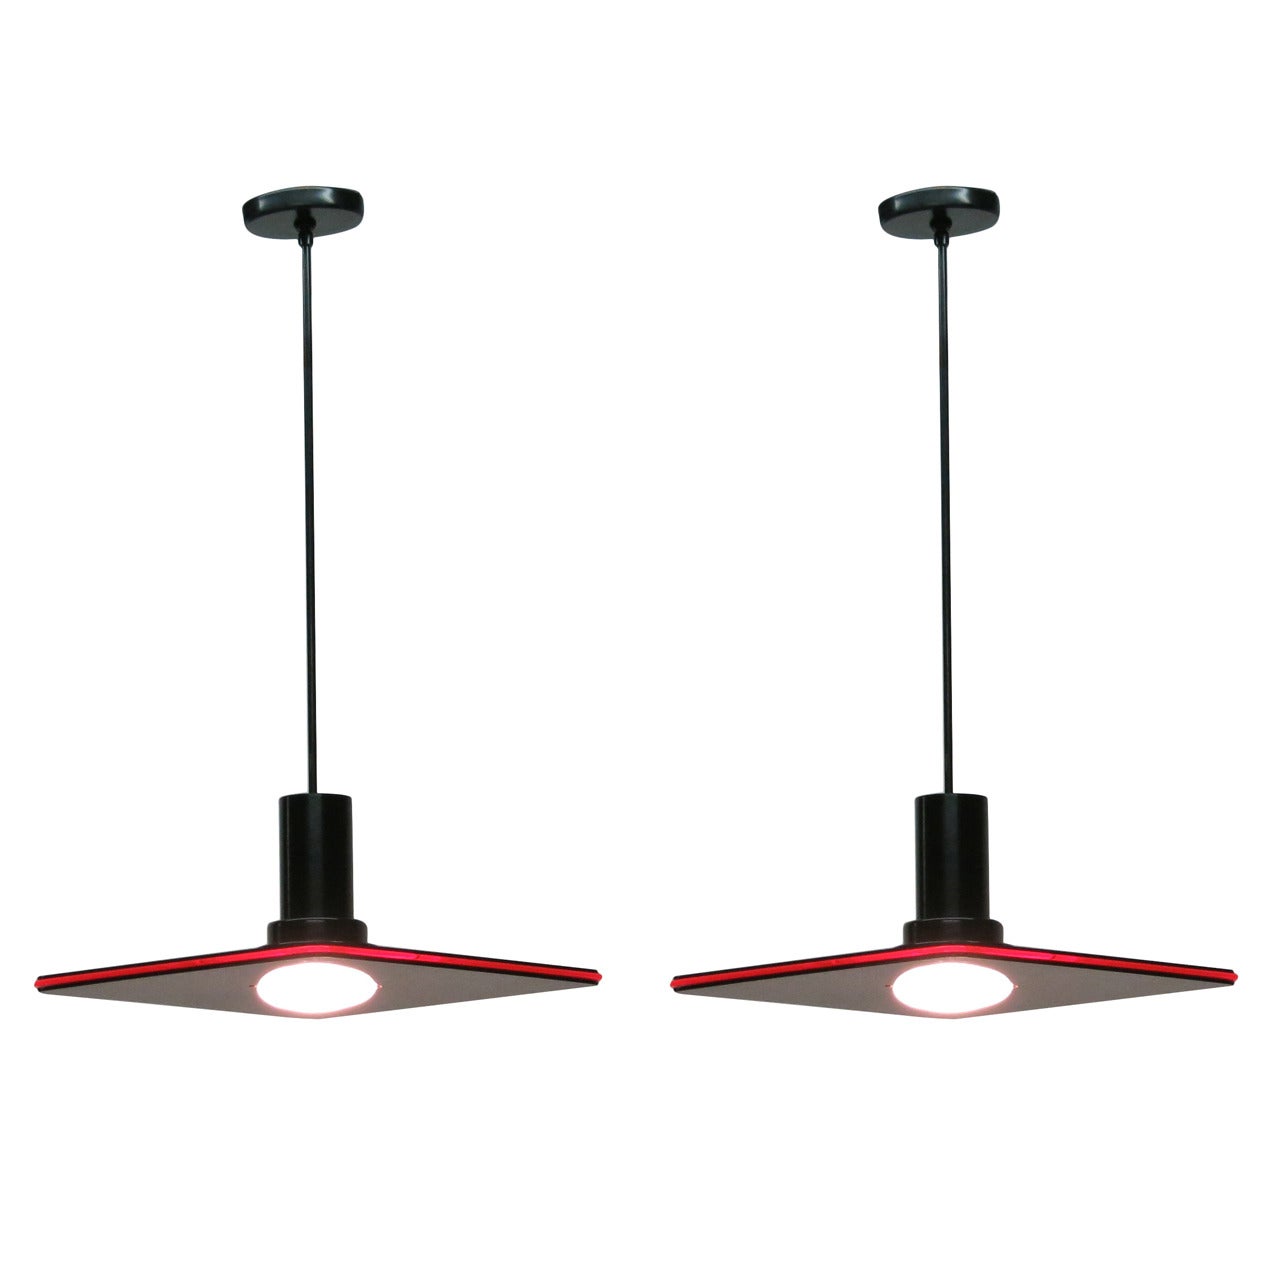 Pair of Ceiling Lights by Frederick Ramond, USA, 1987